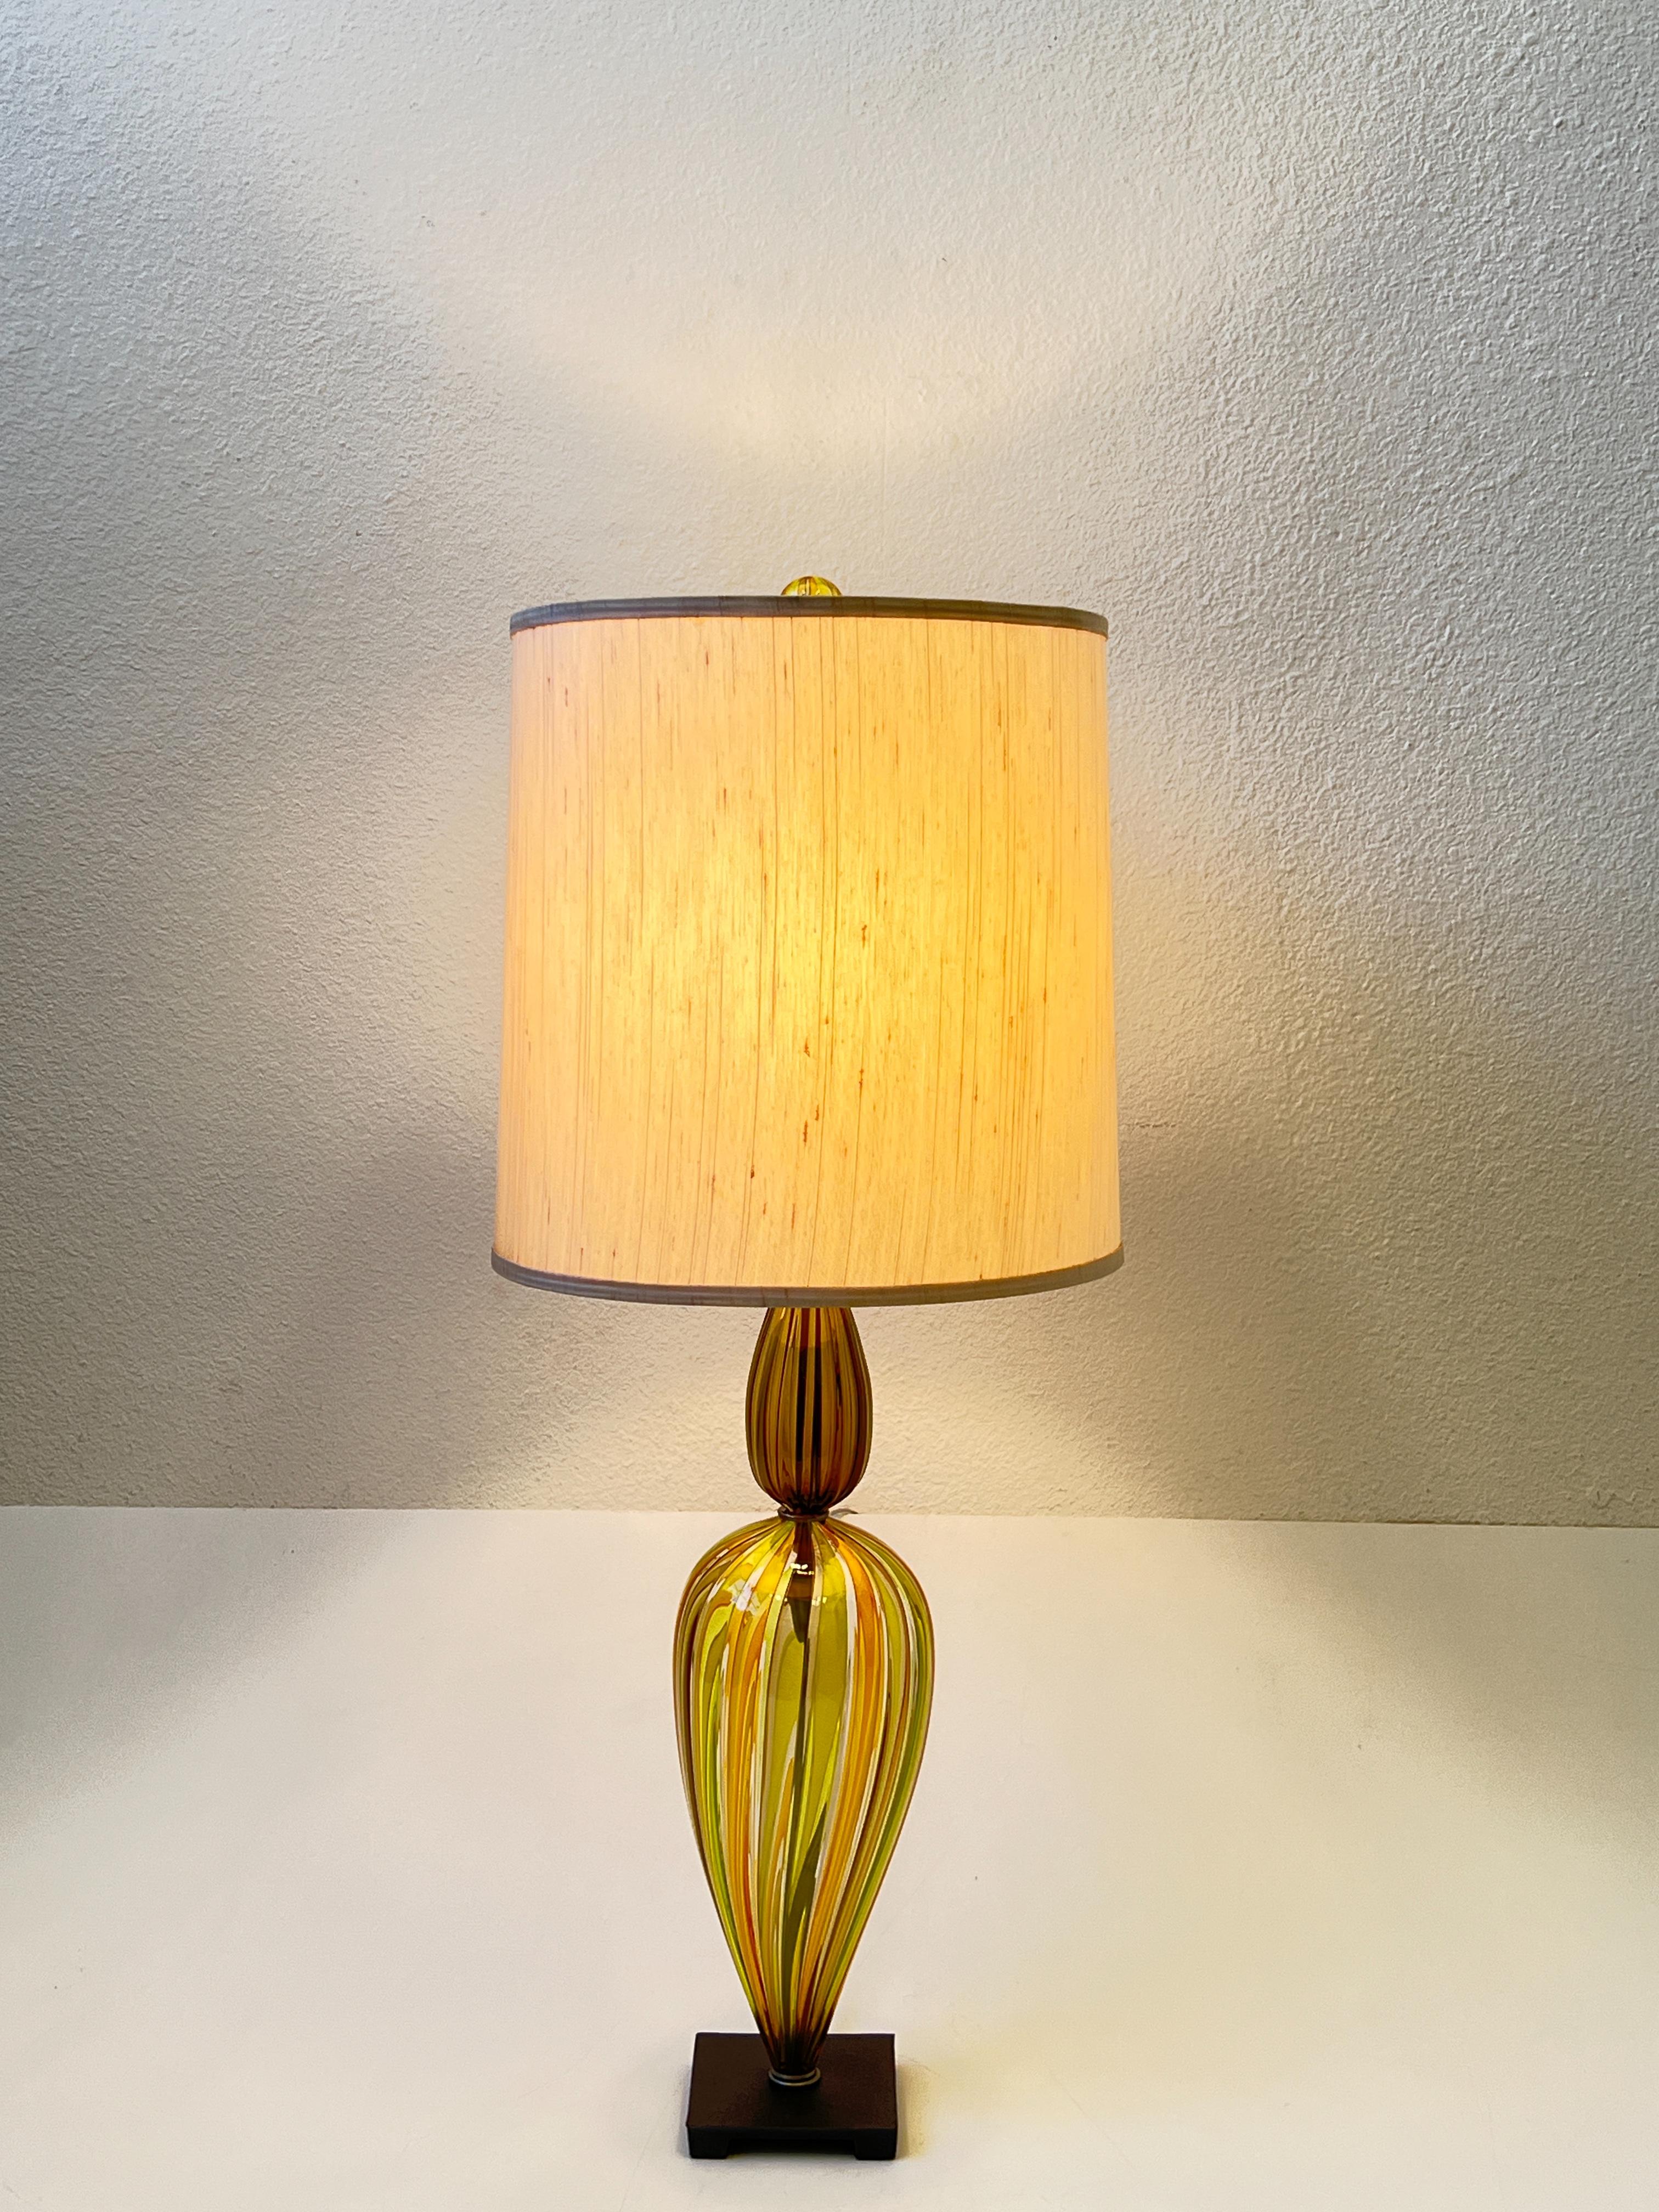 A beautiful 1960’s Italian Murano glass table lamp by Venini. 
The bottom section of the lamp and finial is yellow and green stripes Murano glass, the top section is smoke Murano glass, with satin nickel hardware. 
Original off white silk lamp